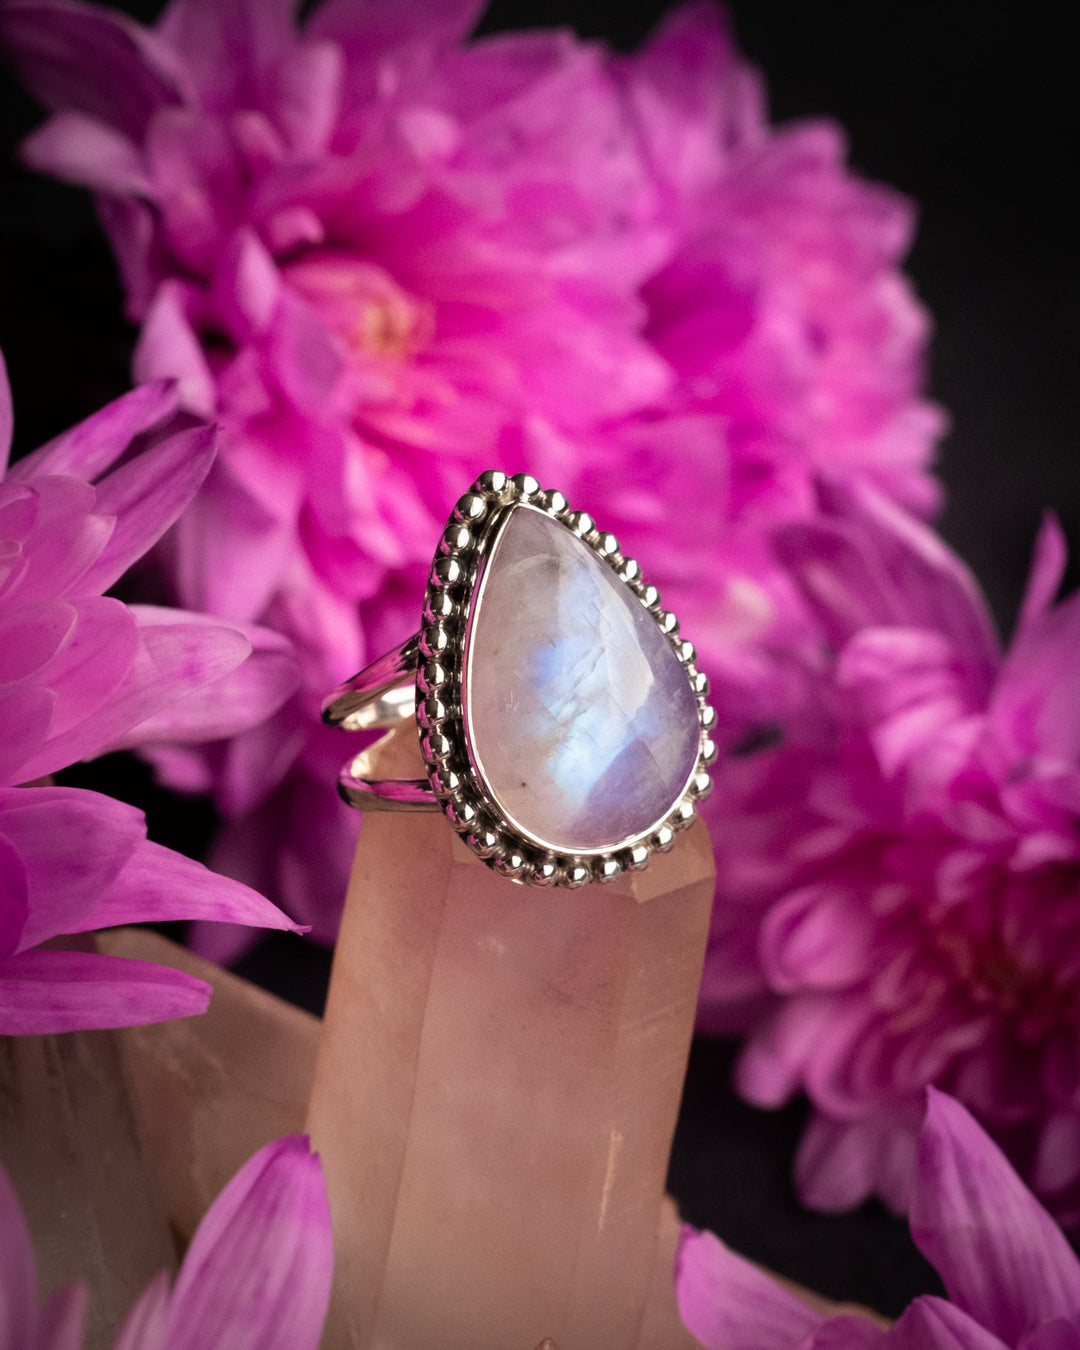 Pink Moonstone Teardrop Ring in Sterling Silver - Size 8 1/4 US / Q 1/2 UK - The Healing Pear